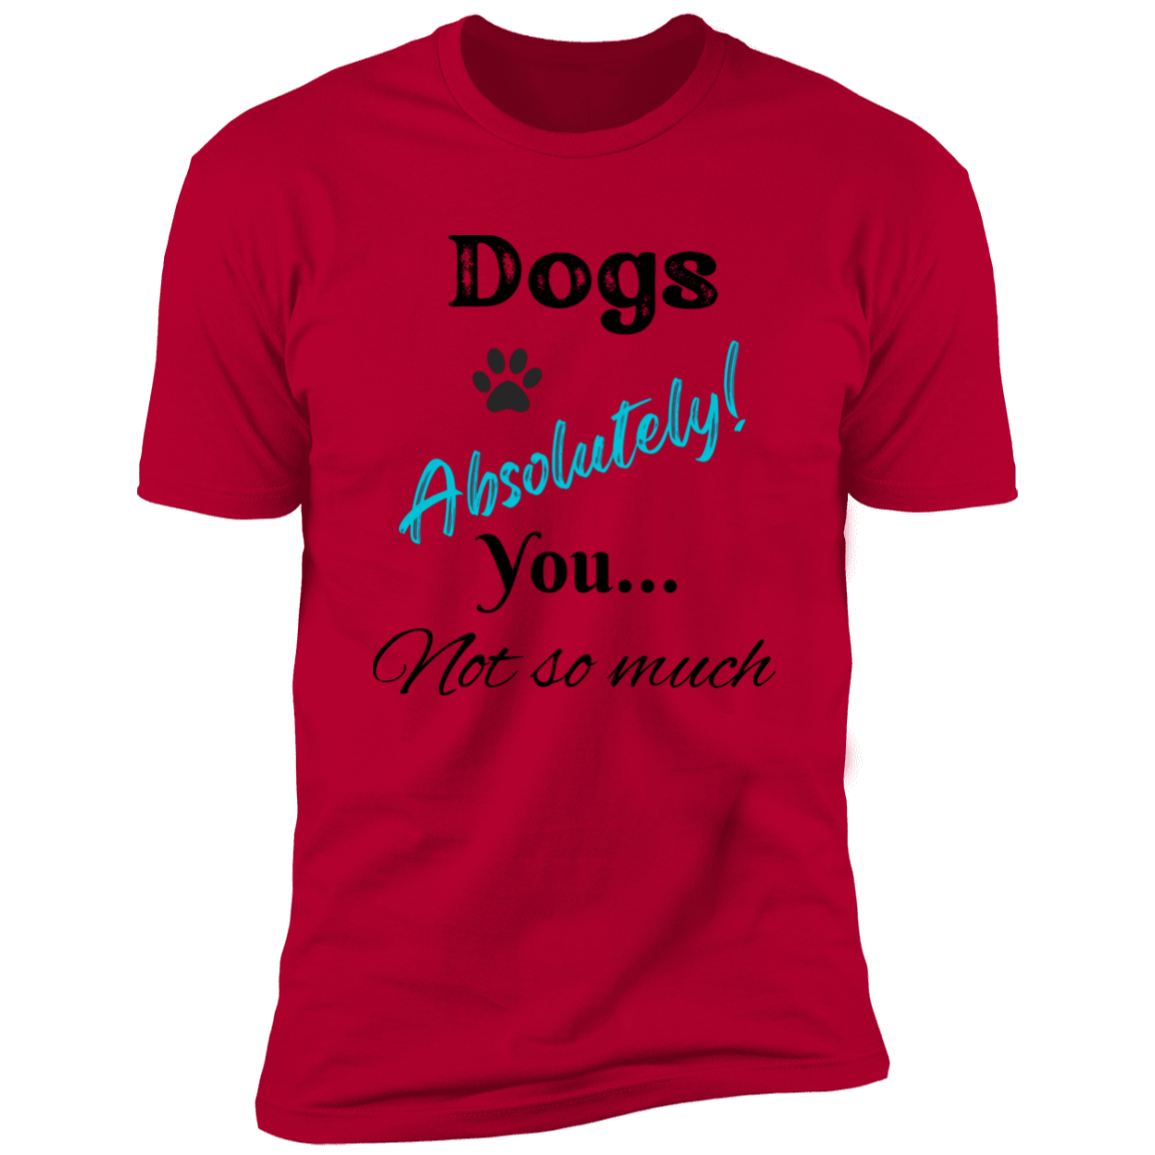 Dogs Absolutely! You Not So Much T-shirt, funny dog shirt dog shirt for humans, in red